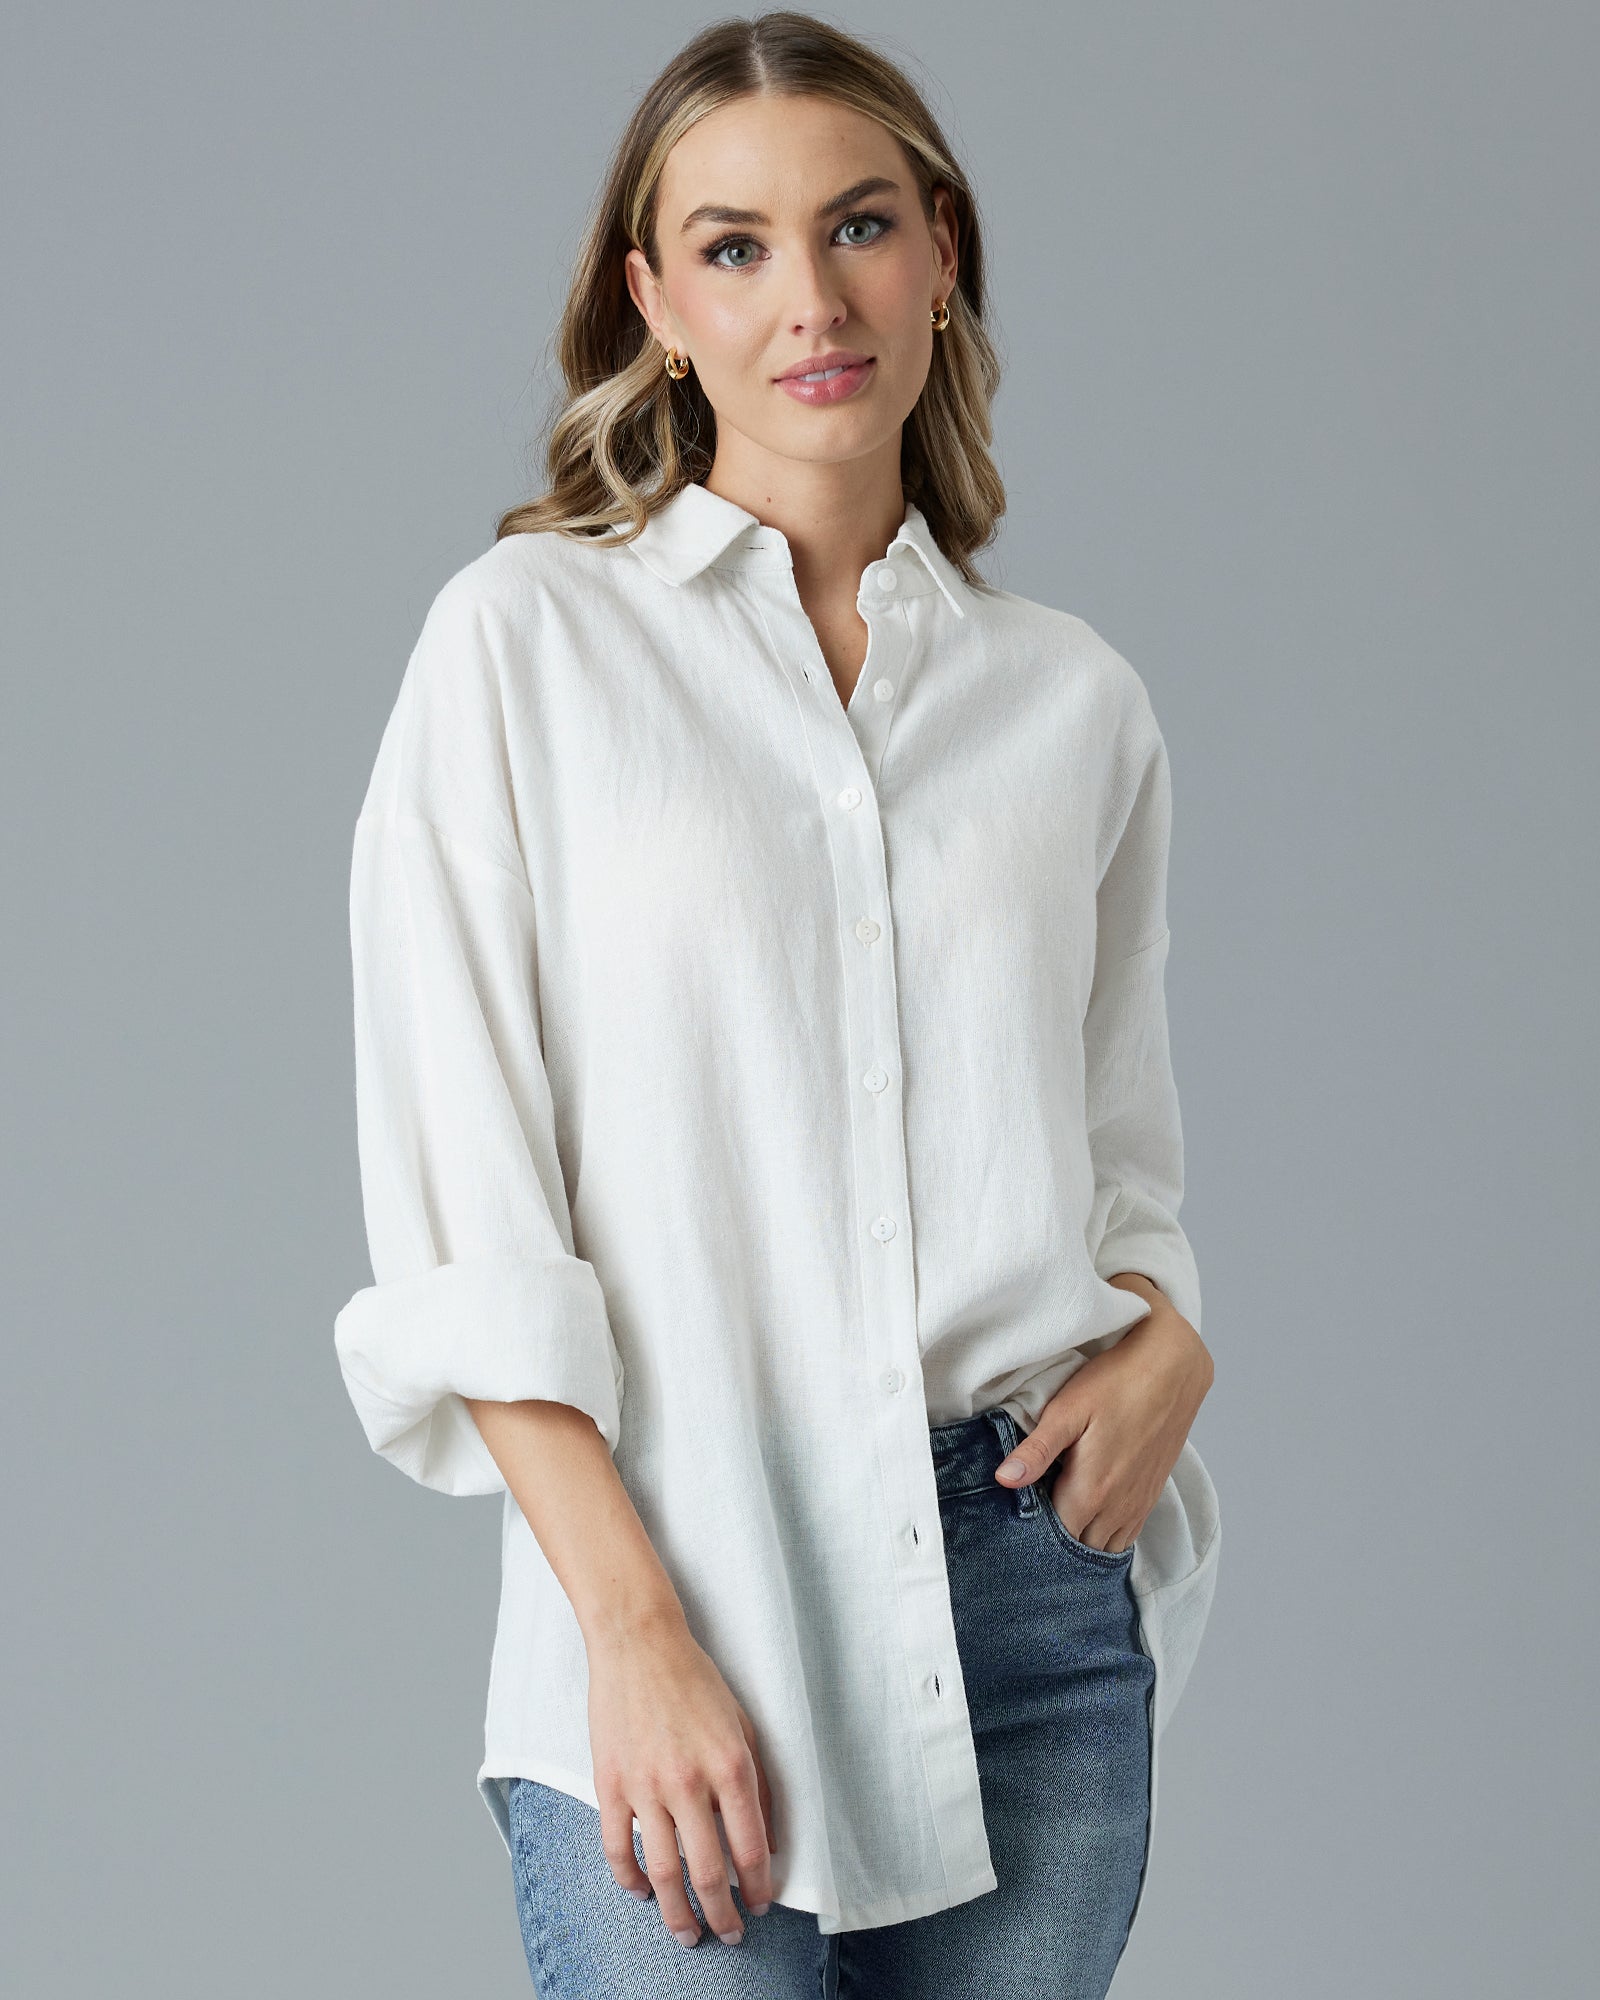 Woman in a white, over-sized, long sleeve buttondown